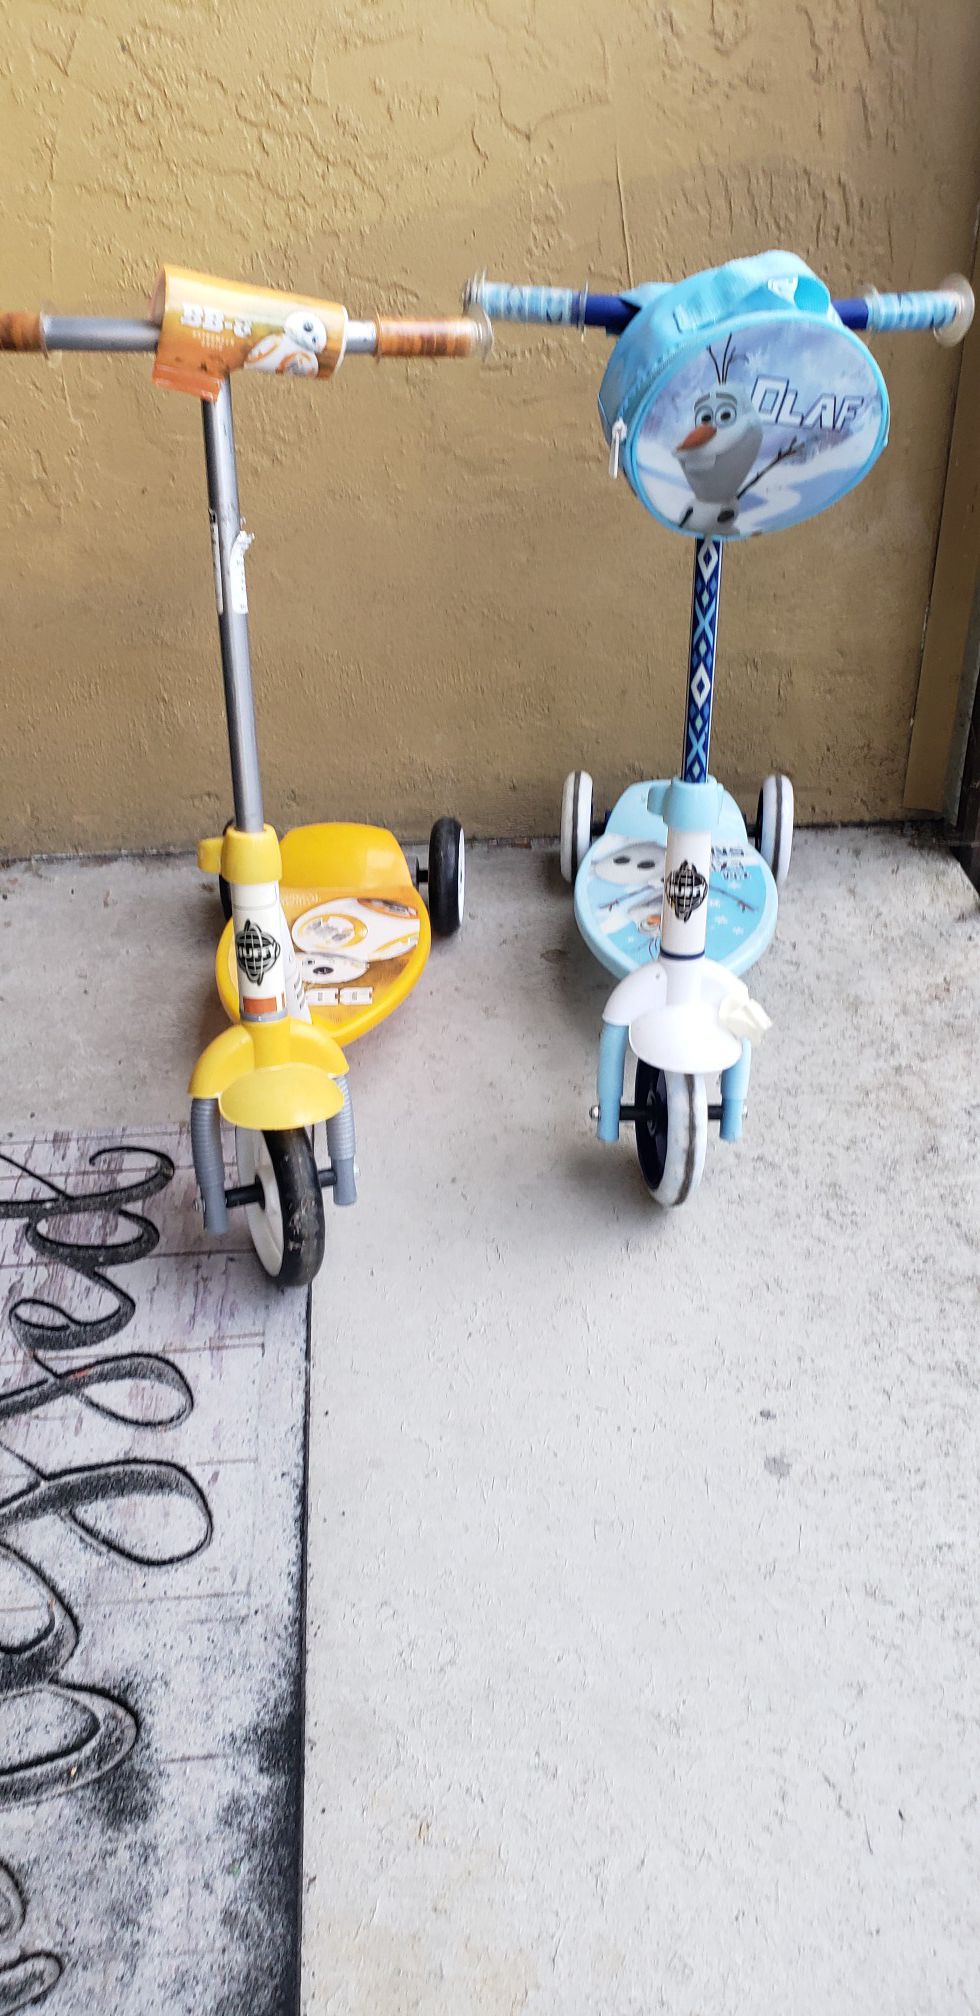 Free toddler scooters. One is olaf, one is star wars. Working well. Kids outgrew them